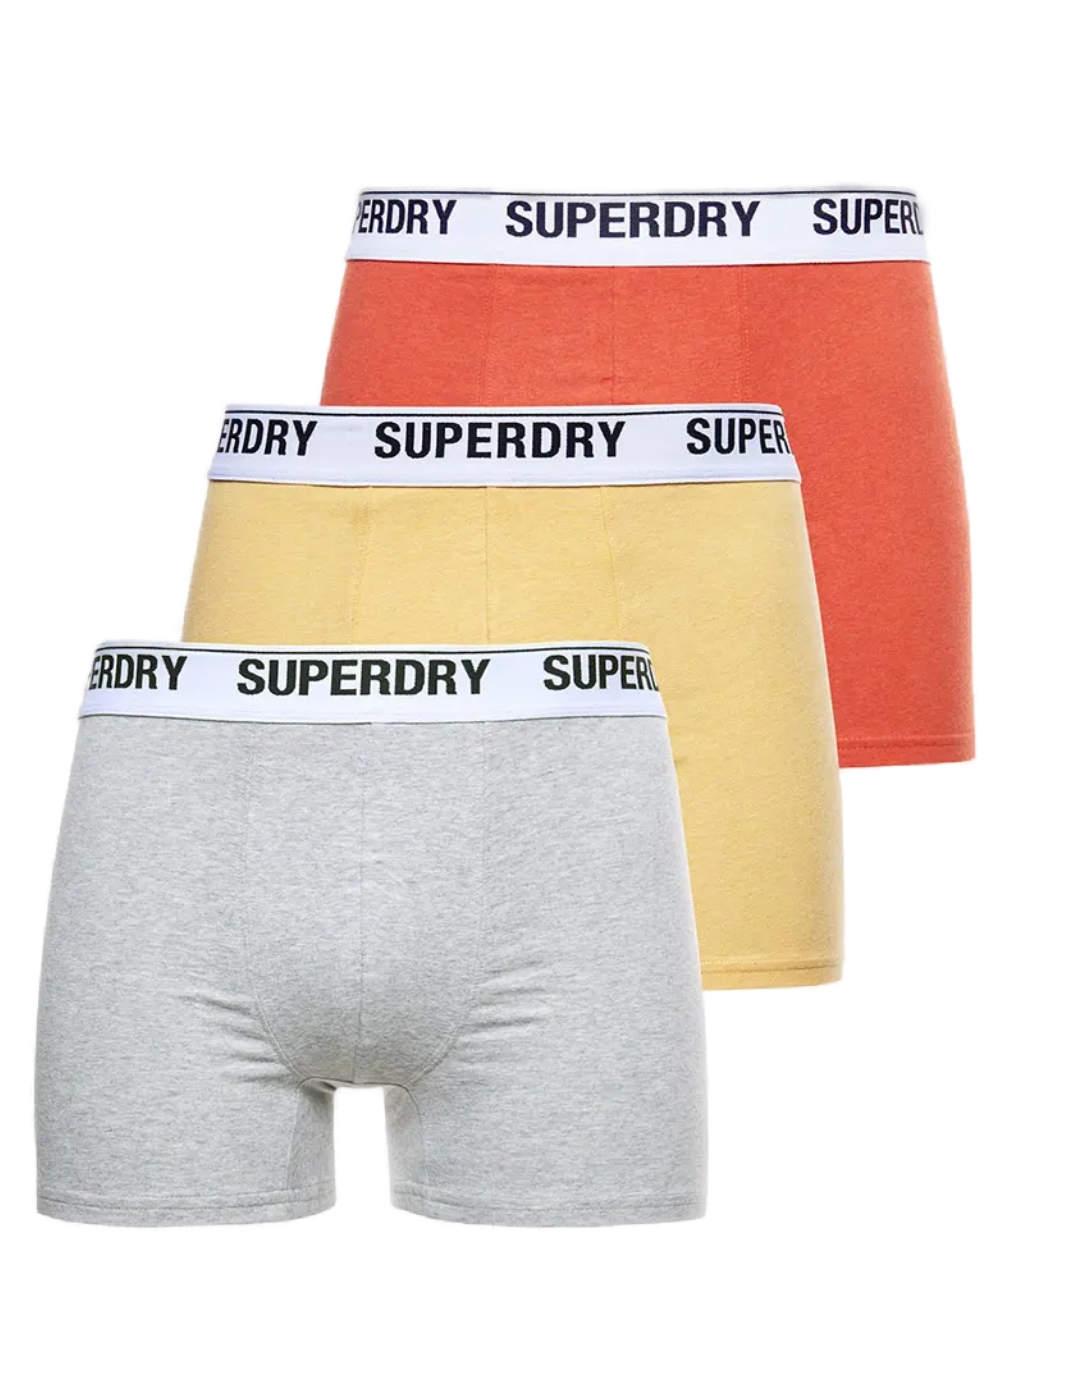 Intimo Superdry boxer pack 3 multi para hombre -z